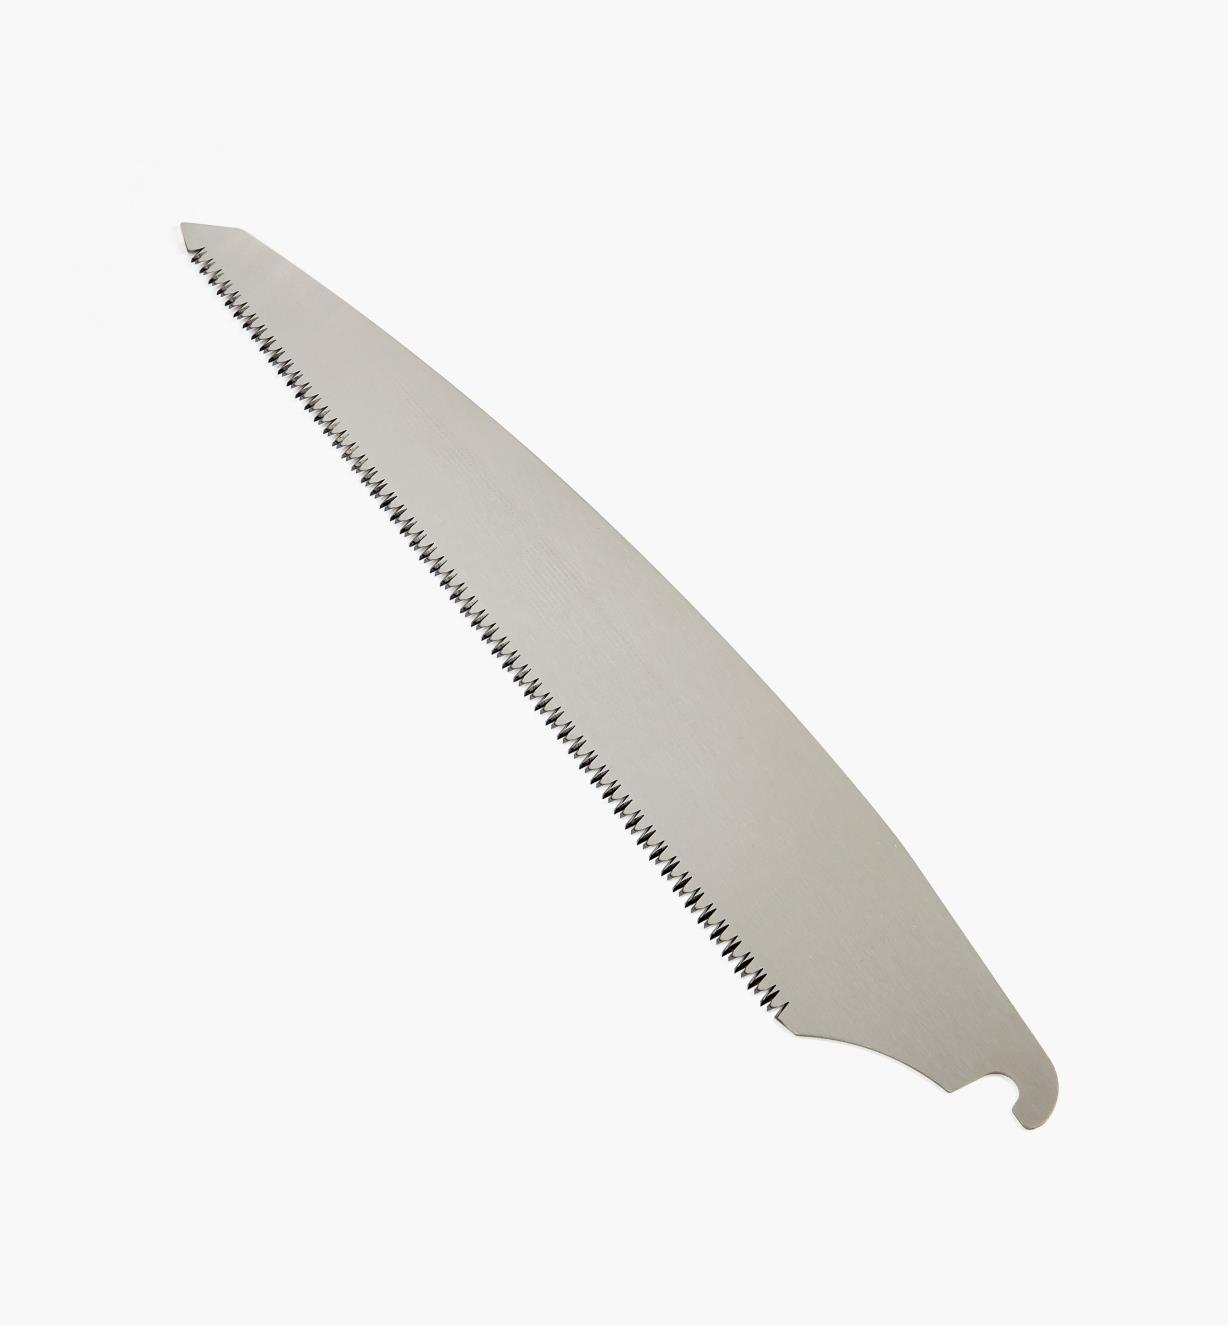 EC712 - Replacement Blade for Japanese Pruning Saw